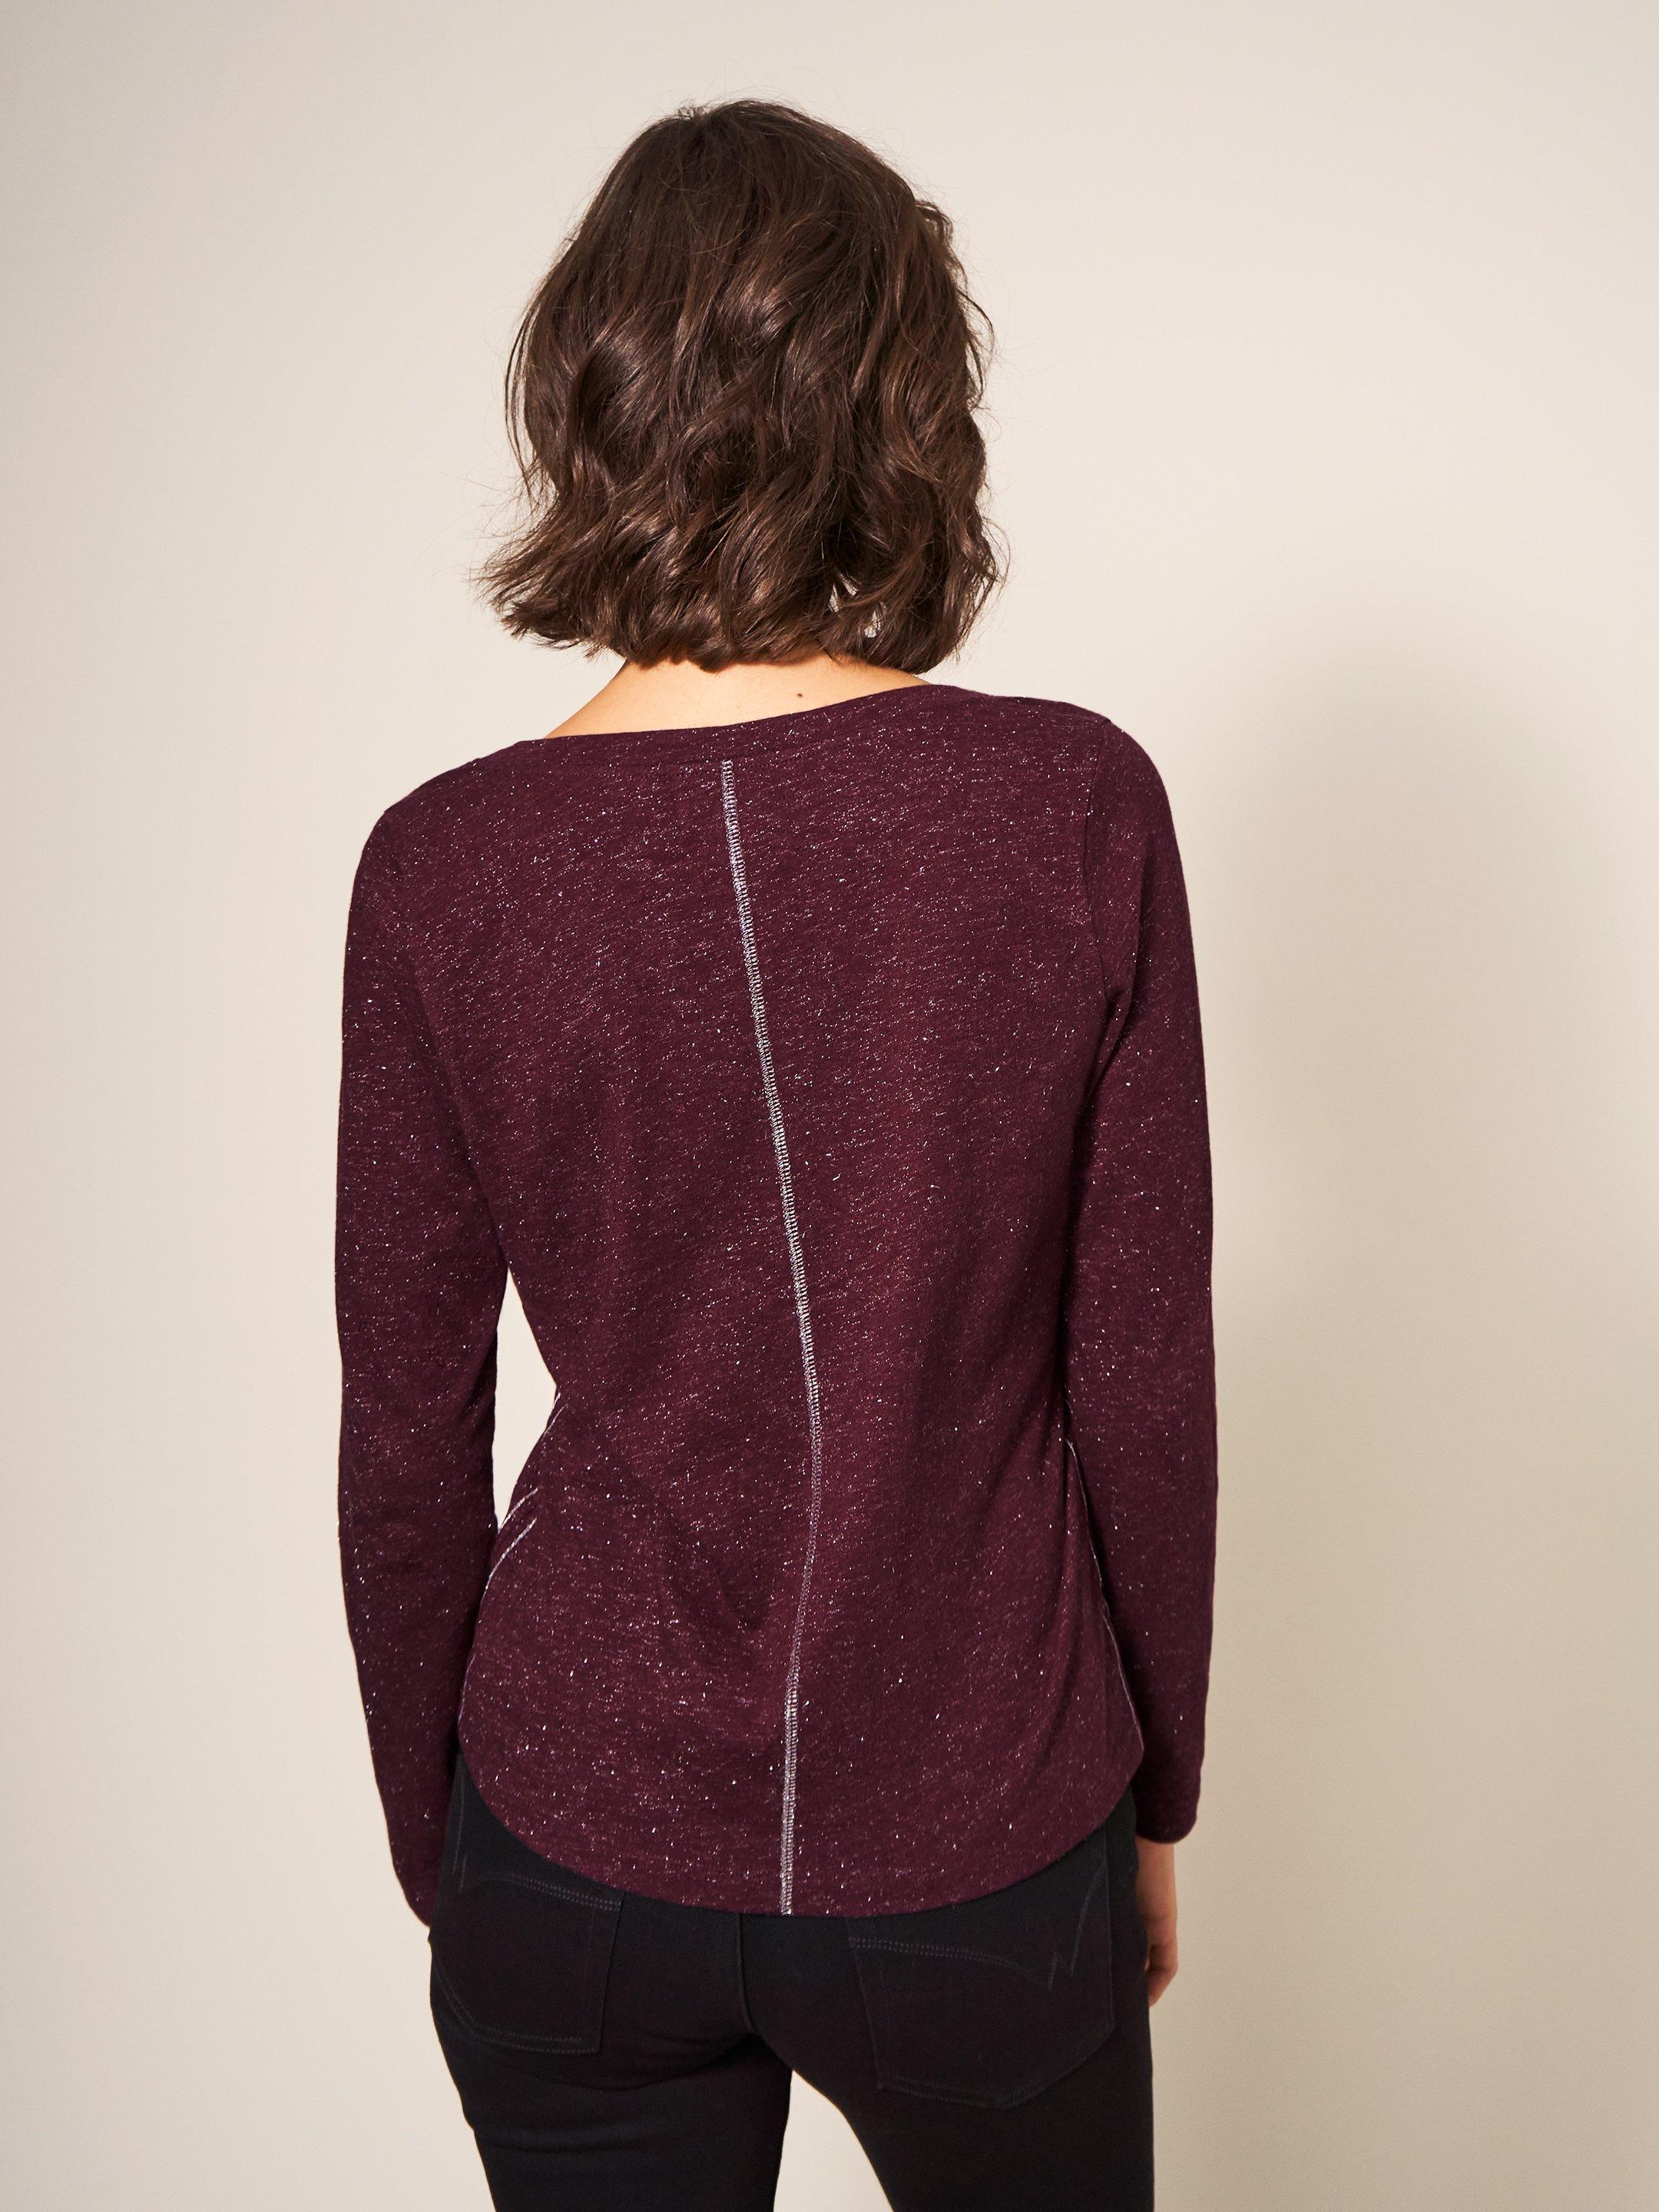 NELLY LS SPARKLE TEE in DK PLUM - MODEL BACK